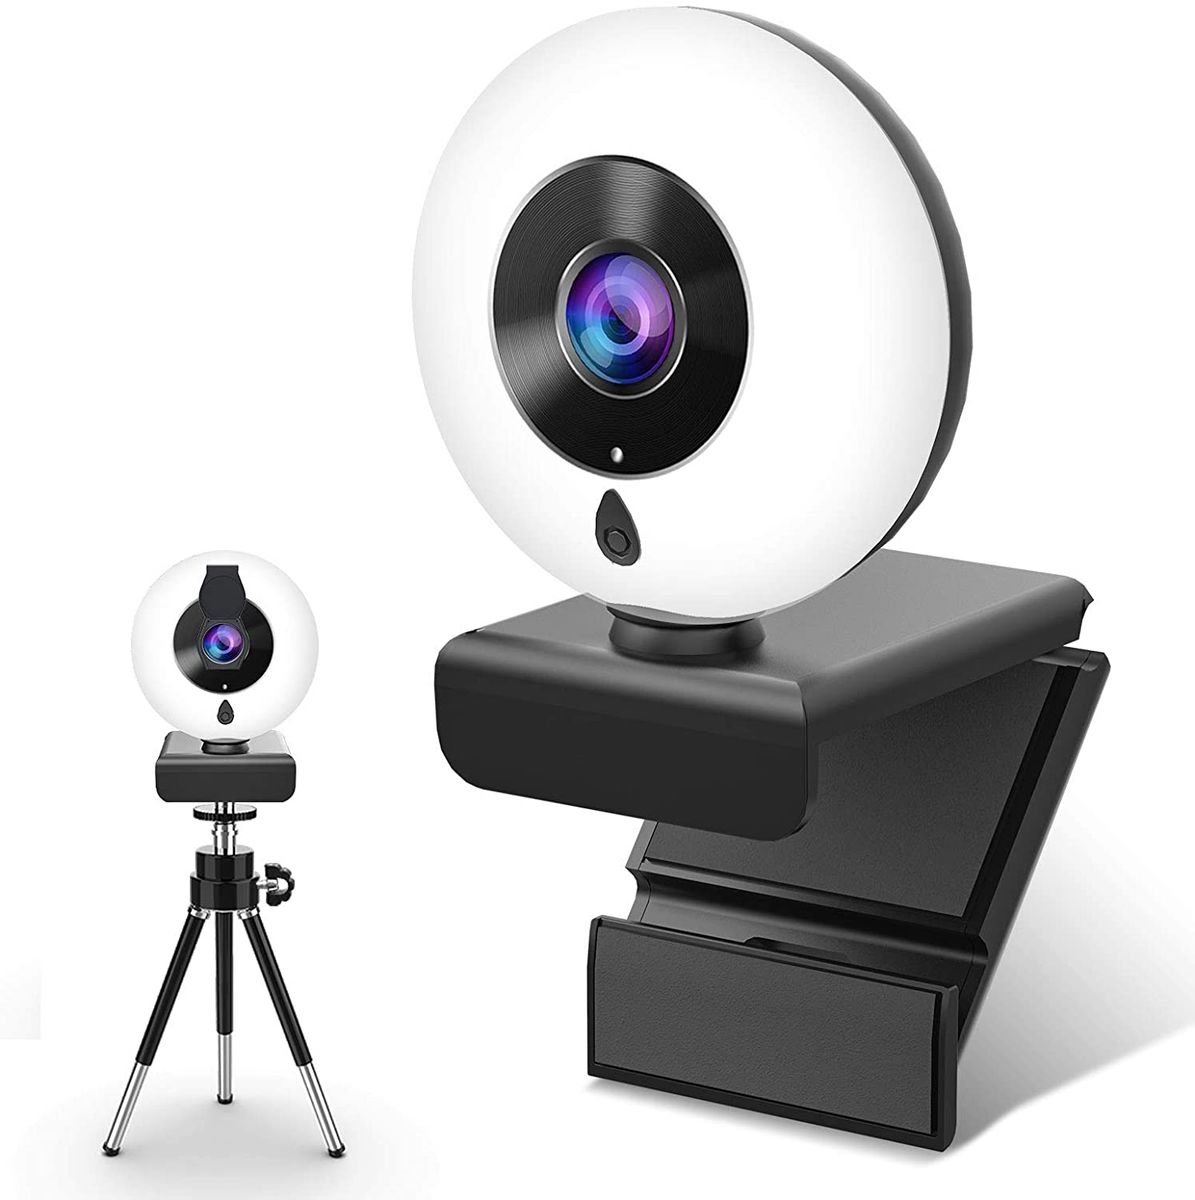 NIYPS 2K HD Webcam with Microphone and Light Ring, Webcam with Cover and Tripod for PC/Mac/Laptop/Desktop, Web CAM for YouTube, Skype, Zoom, Xbox One, PS4 and Video Conferencing